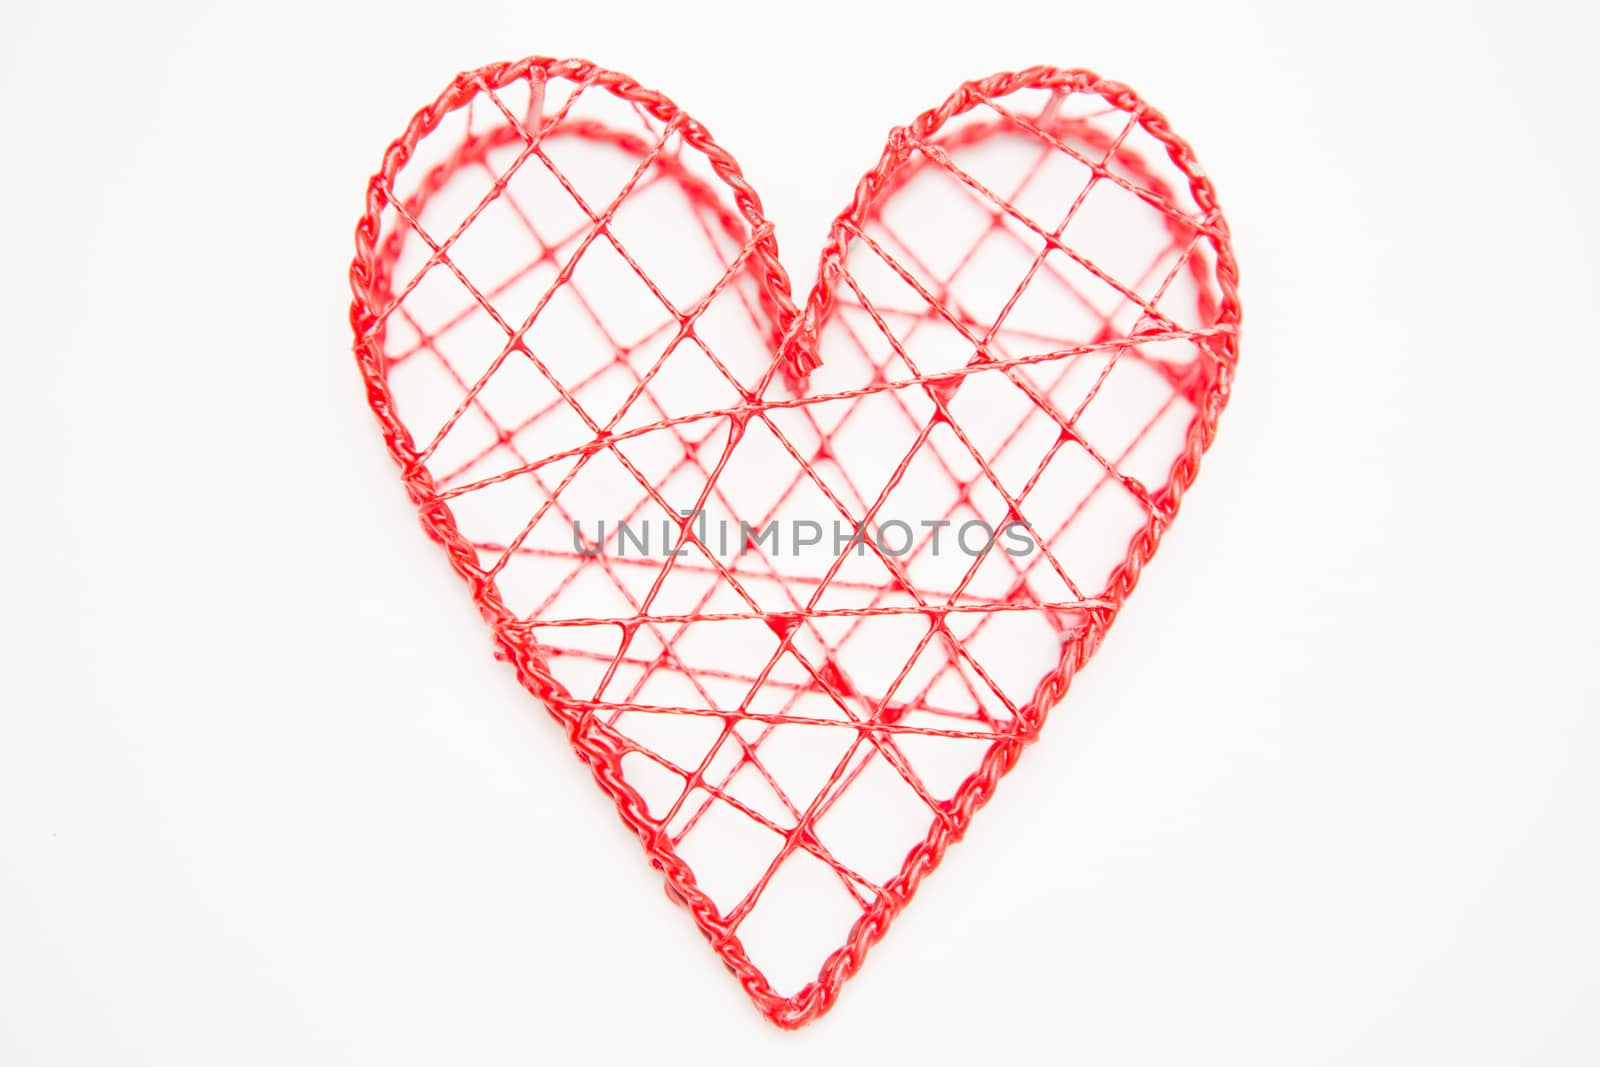 Pink heart shaped box on white background